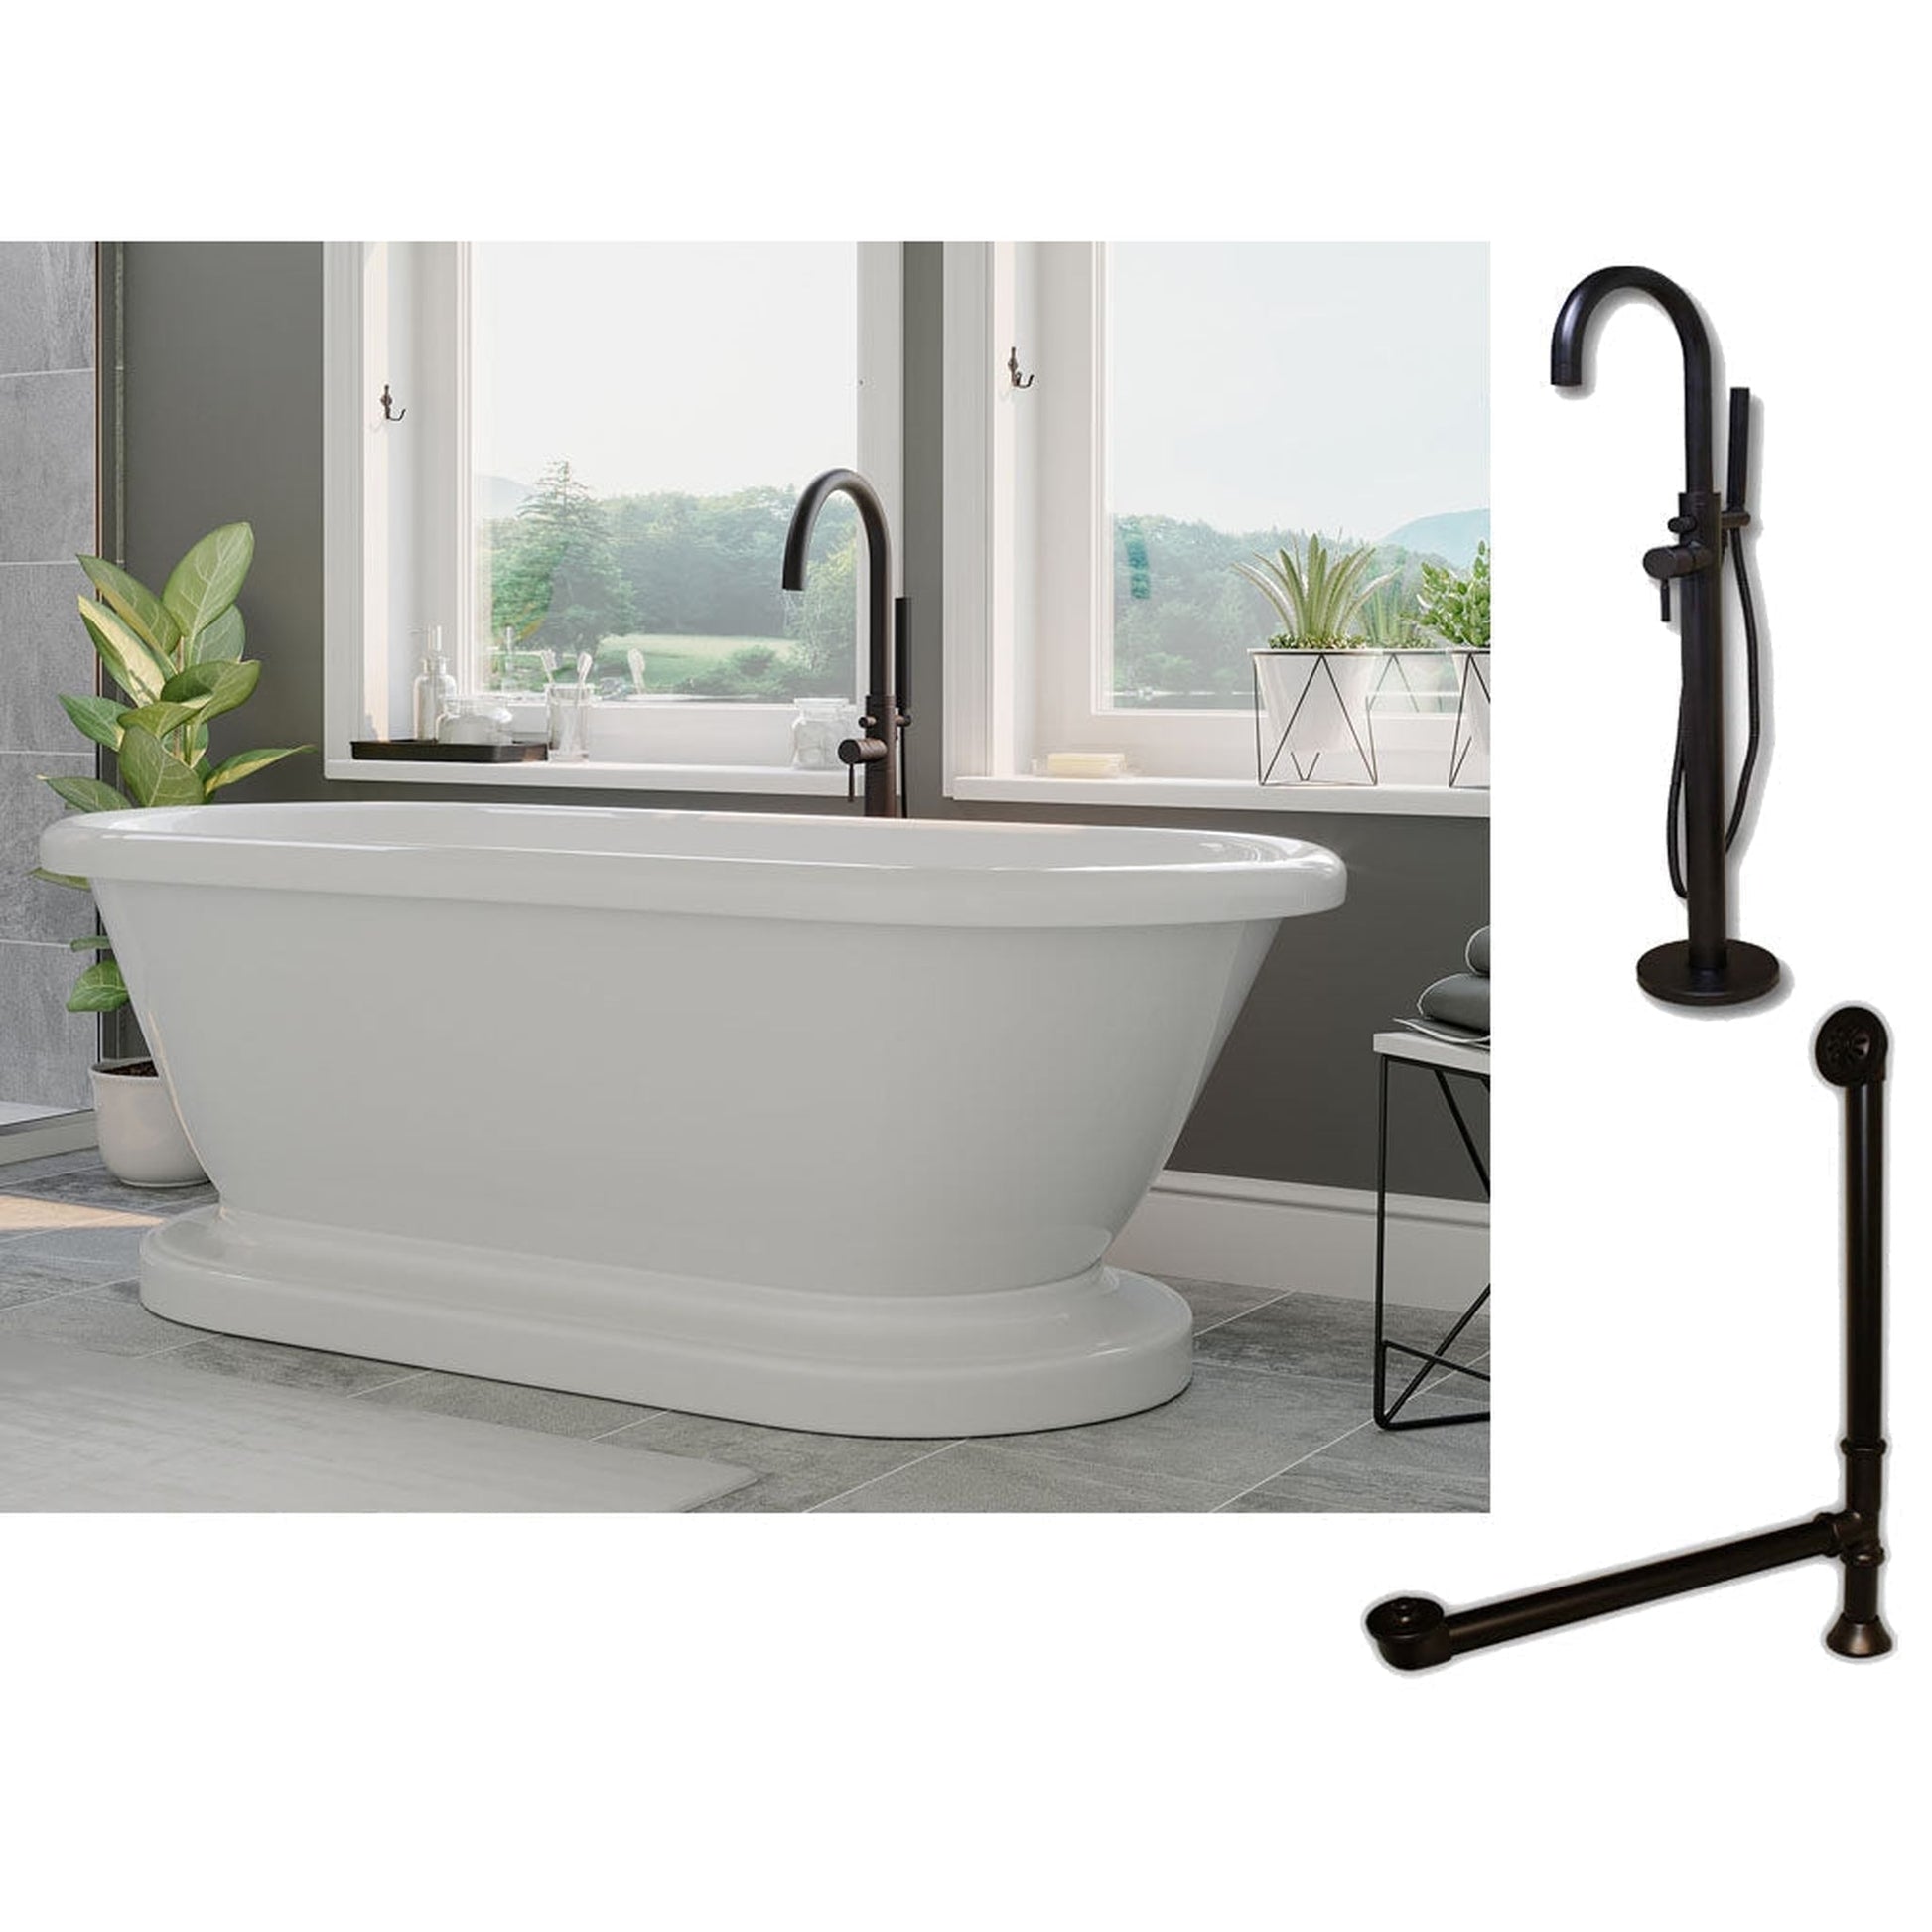 Cambridge Plumbing 70" White Acrylic Double Ended Pedestal Bathtub With No Deck Holes And Complete Plumbing Package Including Modern Floor Mounted Faucet, Drain And Overflow Assembly In Oil Rubbed Bronze